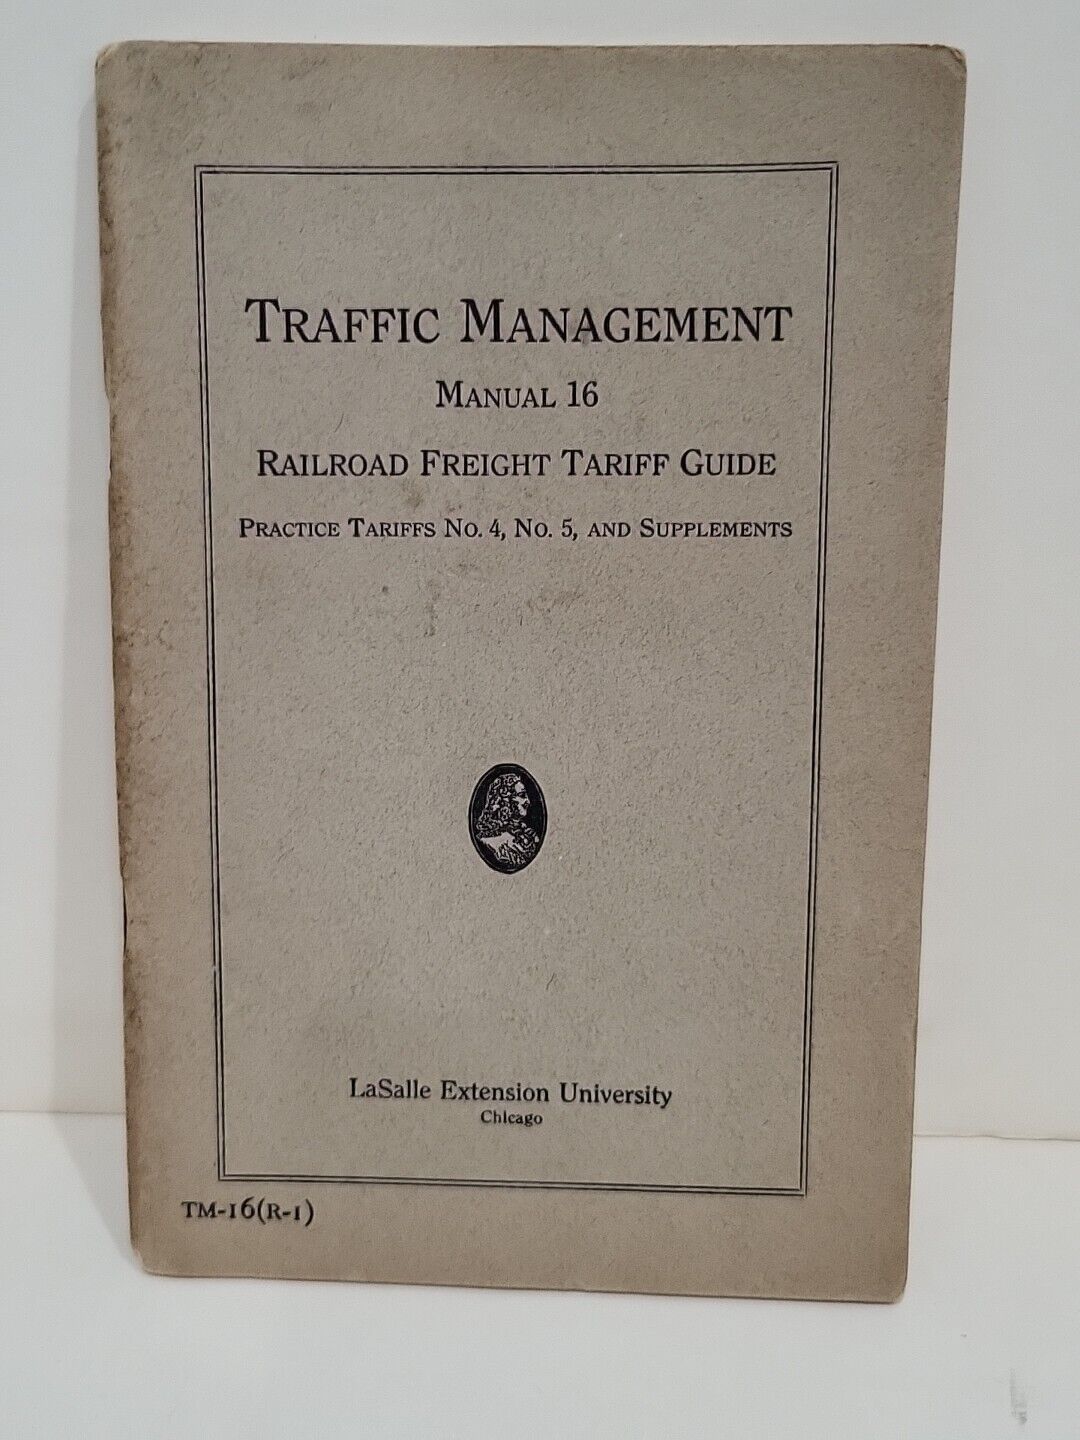 1926 Traffic Management Manual 16 Railroad Freight Tariff Guide LaSalle Ext